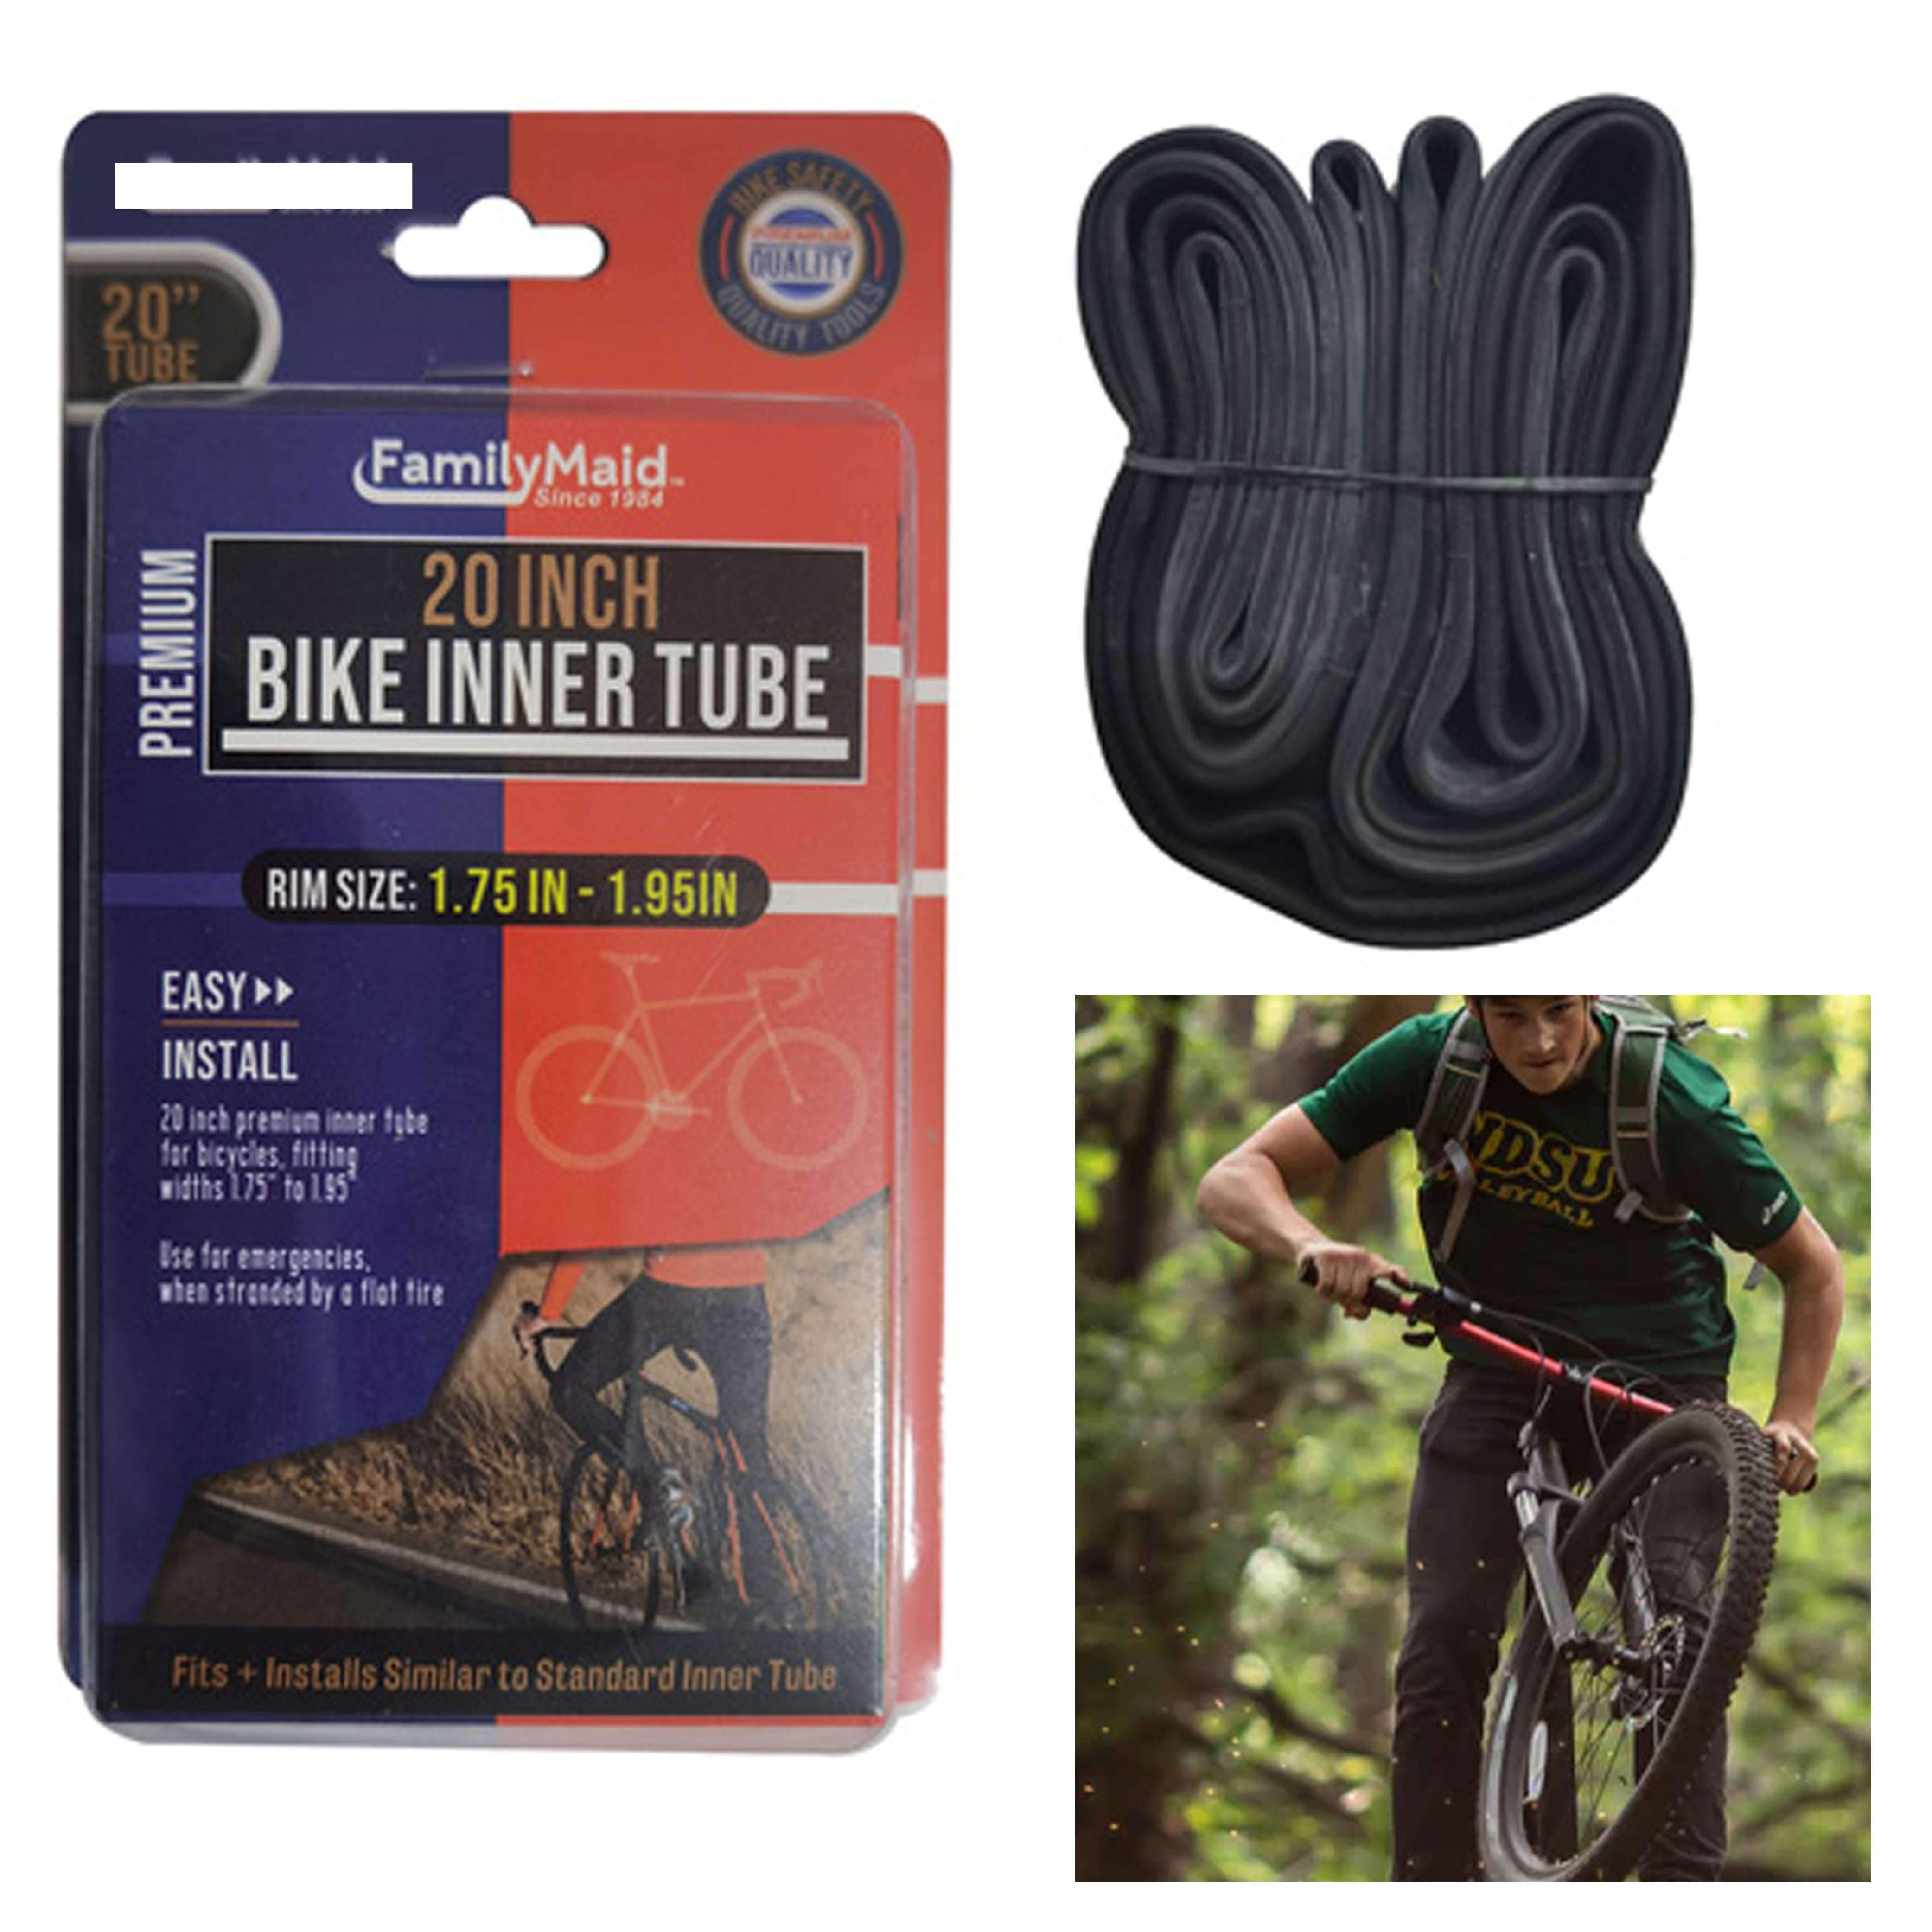 mtb cycle mountain bike atb Brand new 26 x 1.95 inch schrader inner tube 